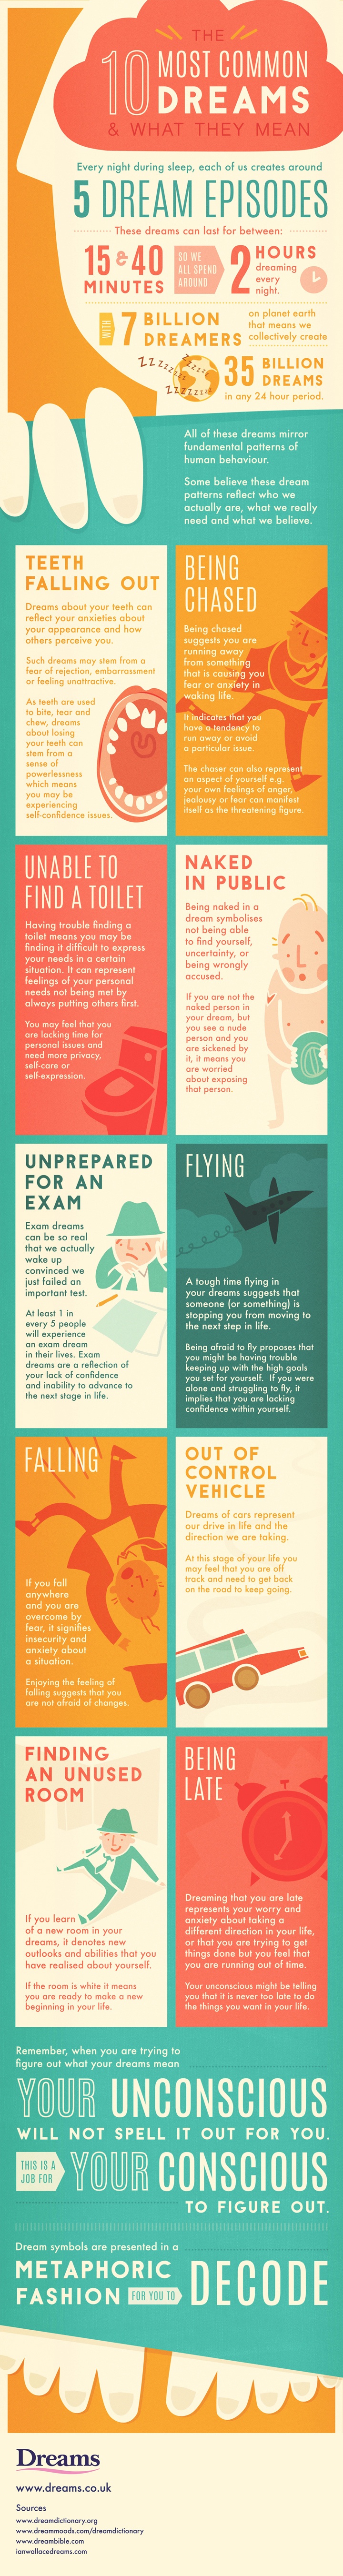 most common dreams infographic